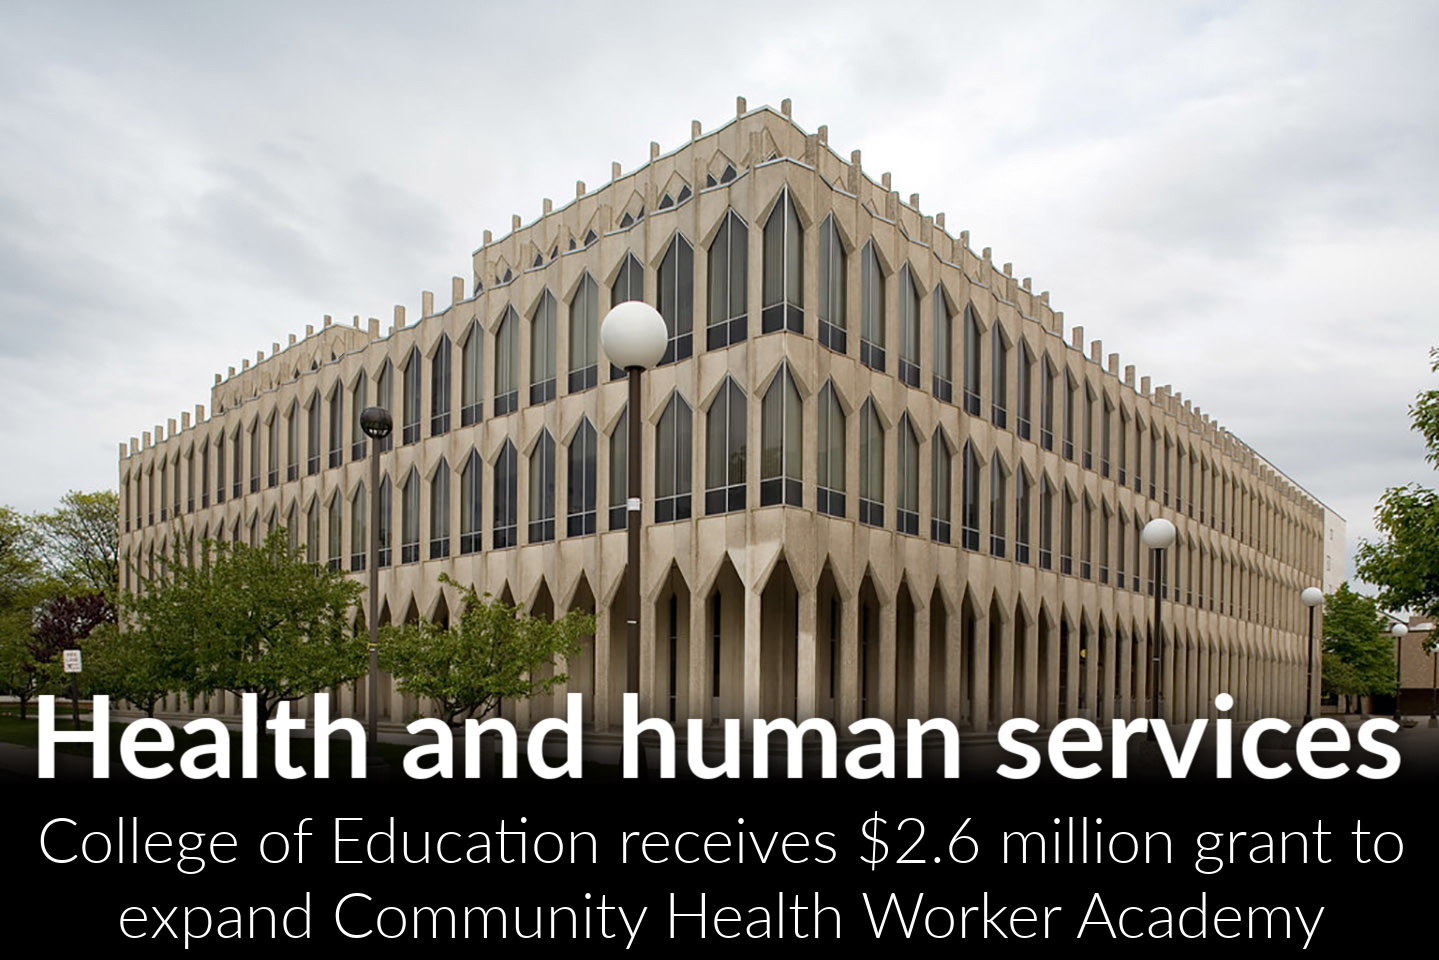 Wayne State University’s College of Education receives $2.6 million grant to expand its Community Health Worker Academy